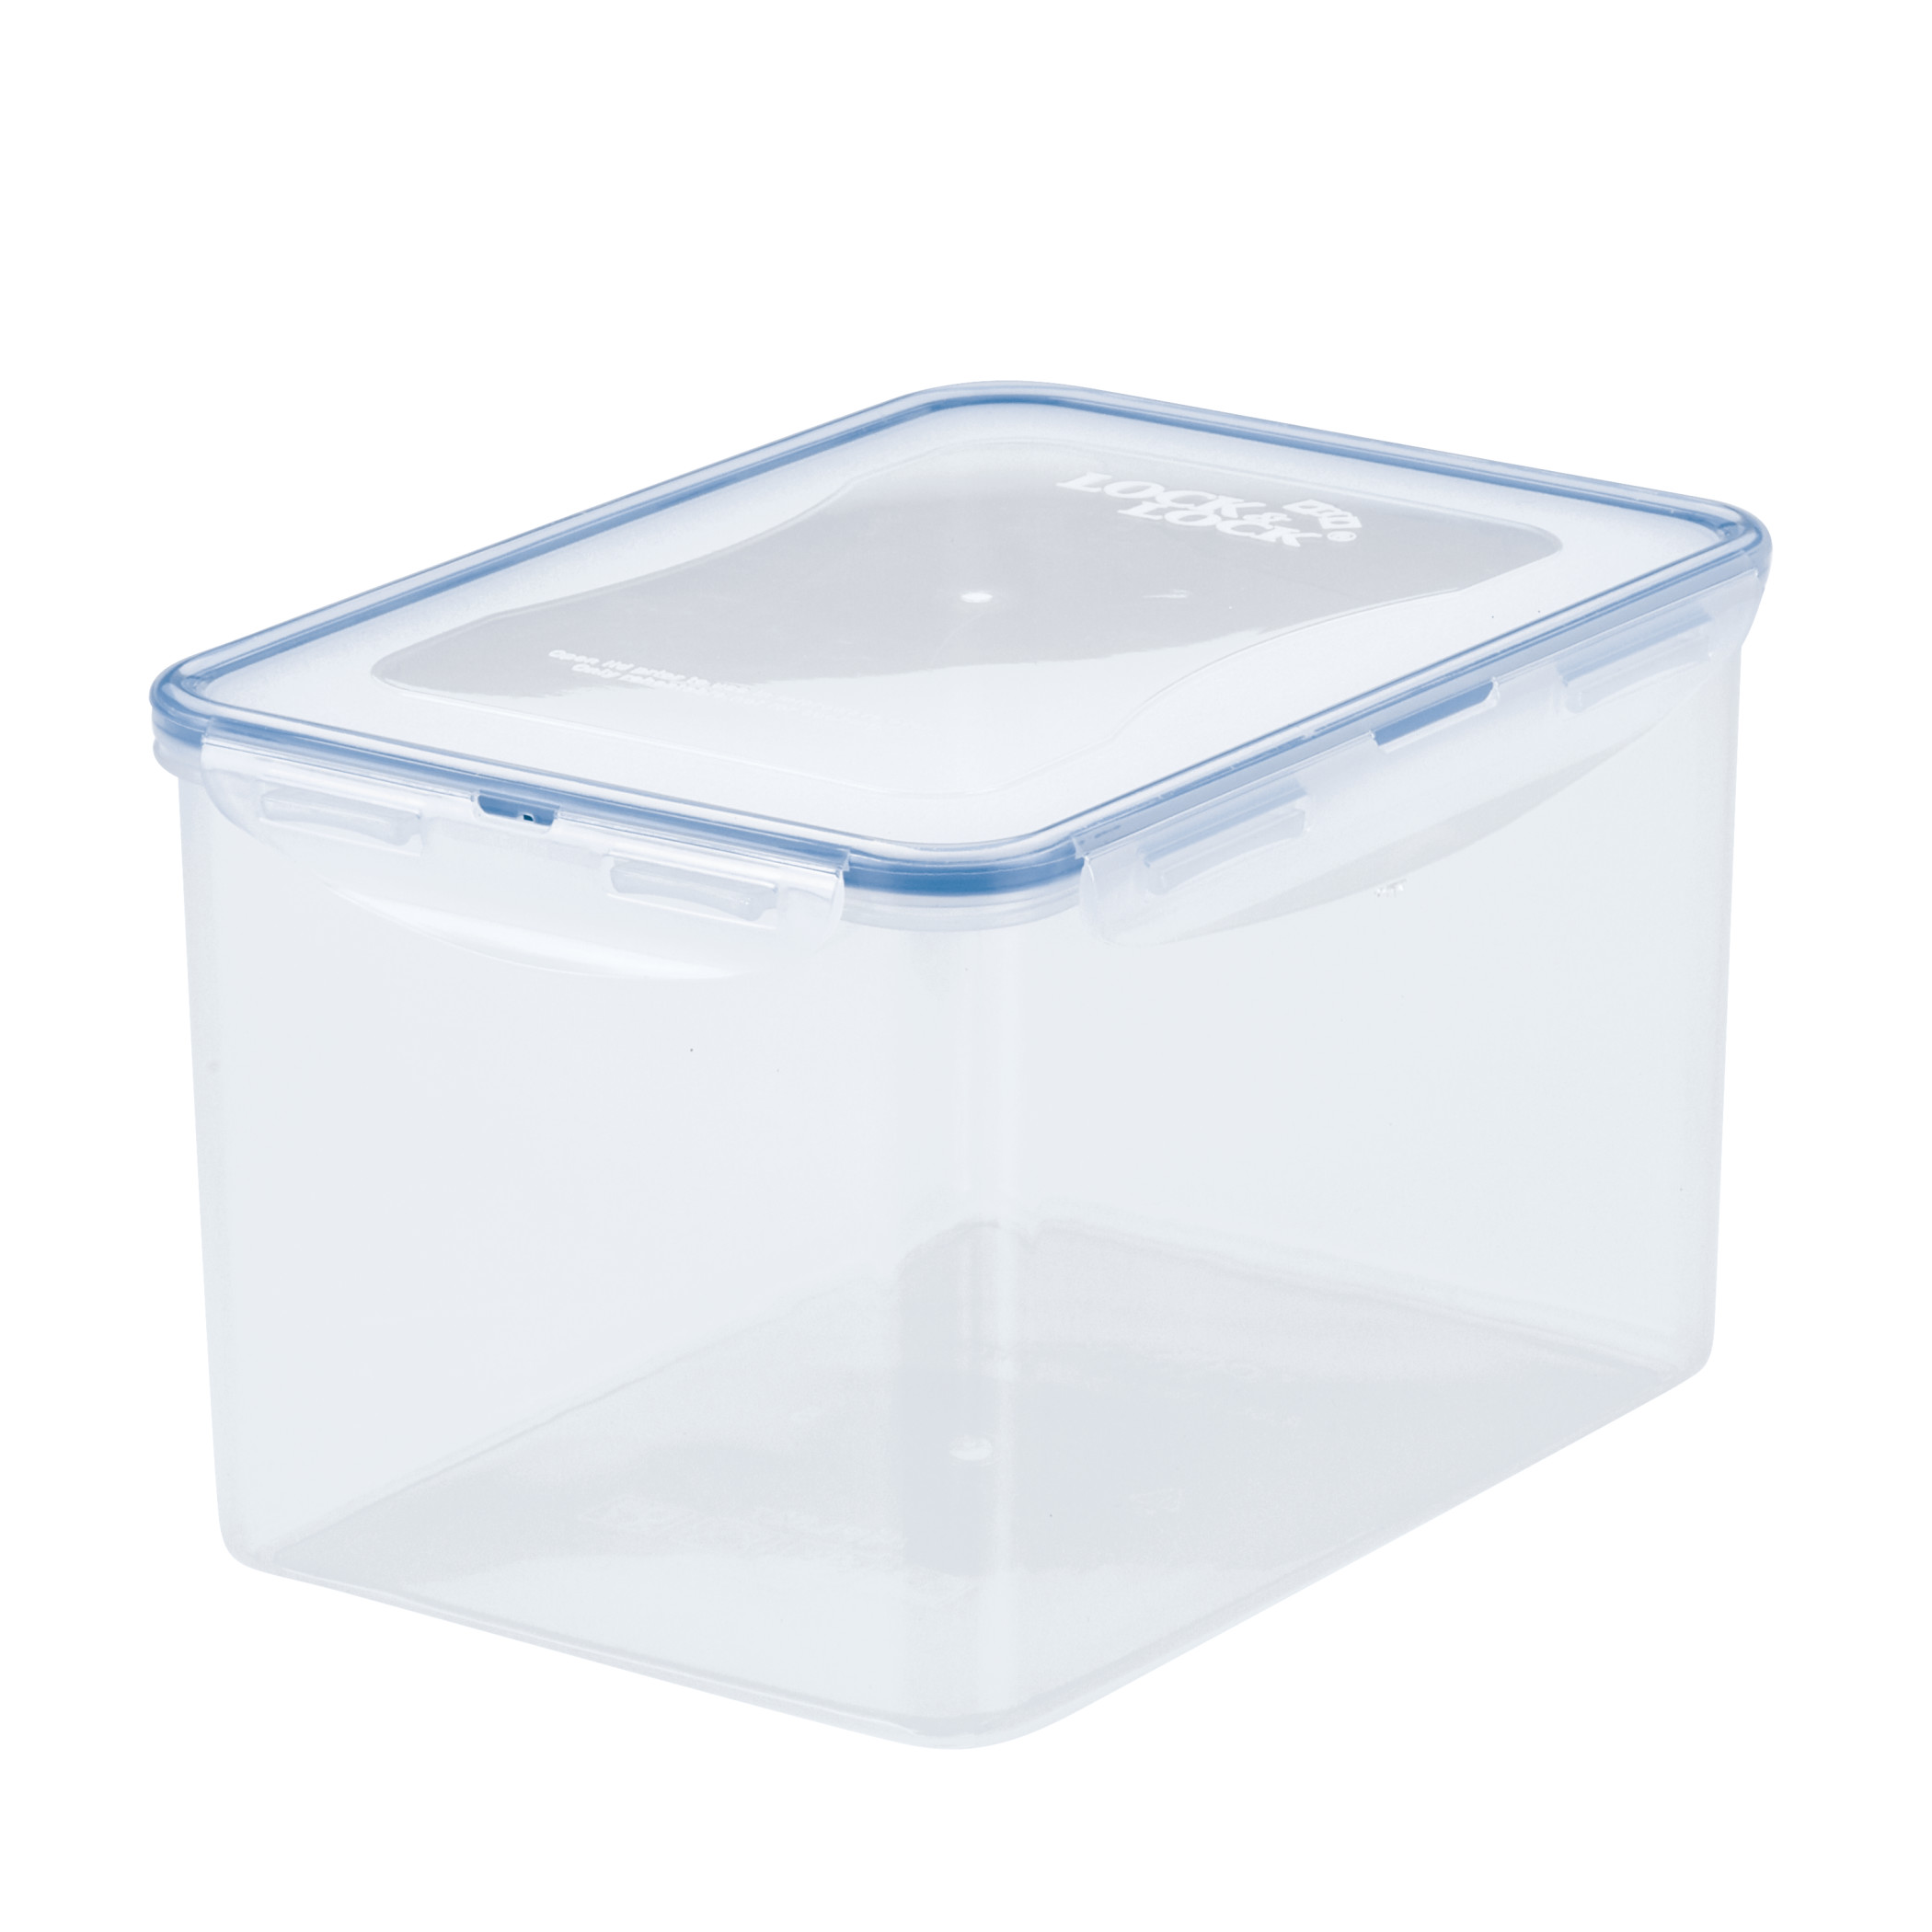 LocknLock Storage Food Storage Container, 18.8-Cup, Clear - image 1 of 12